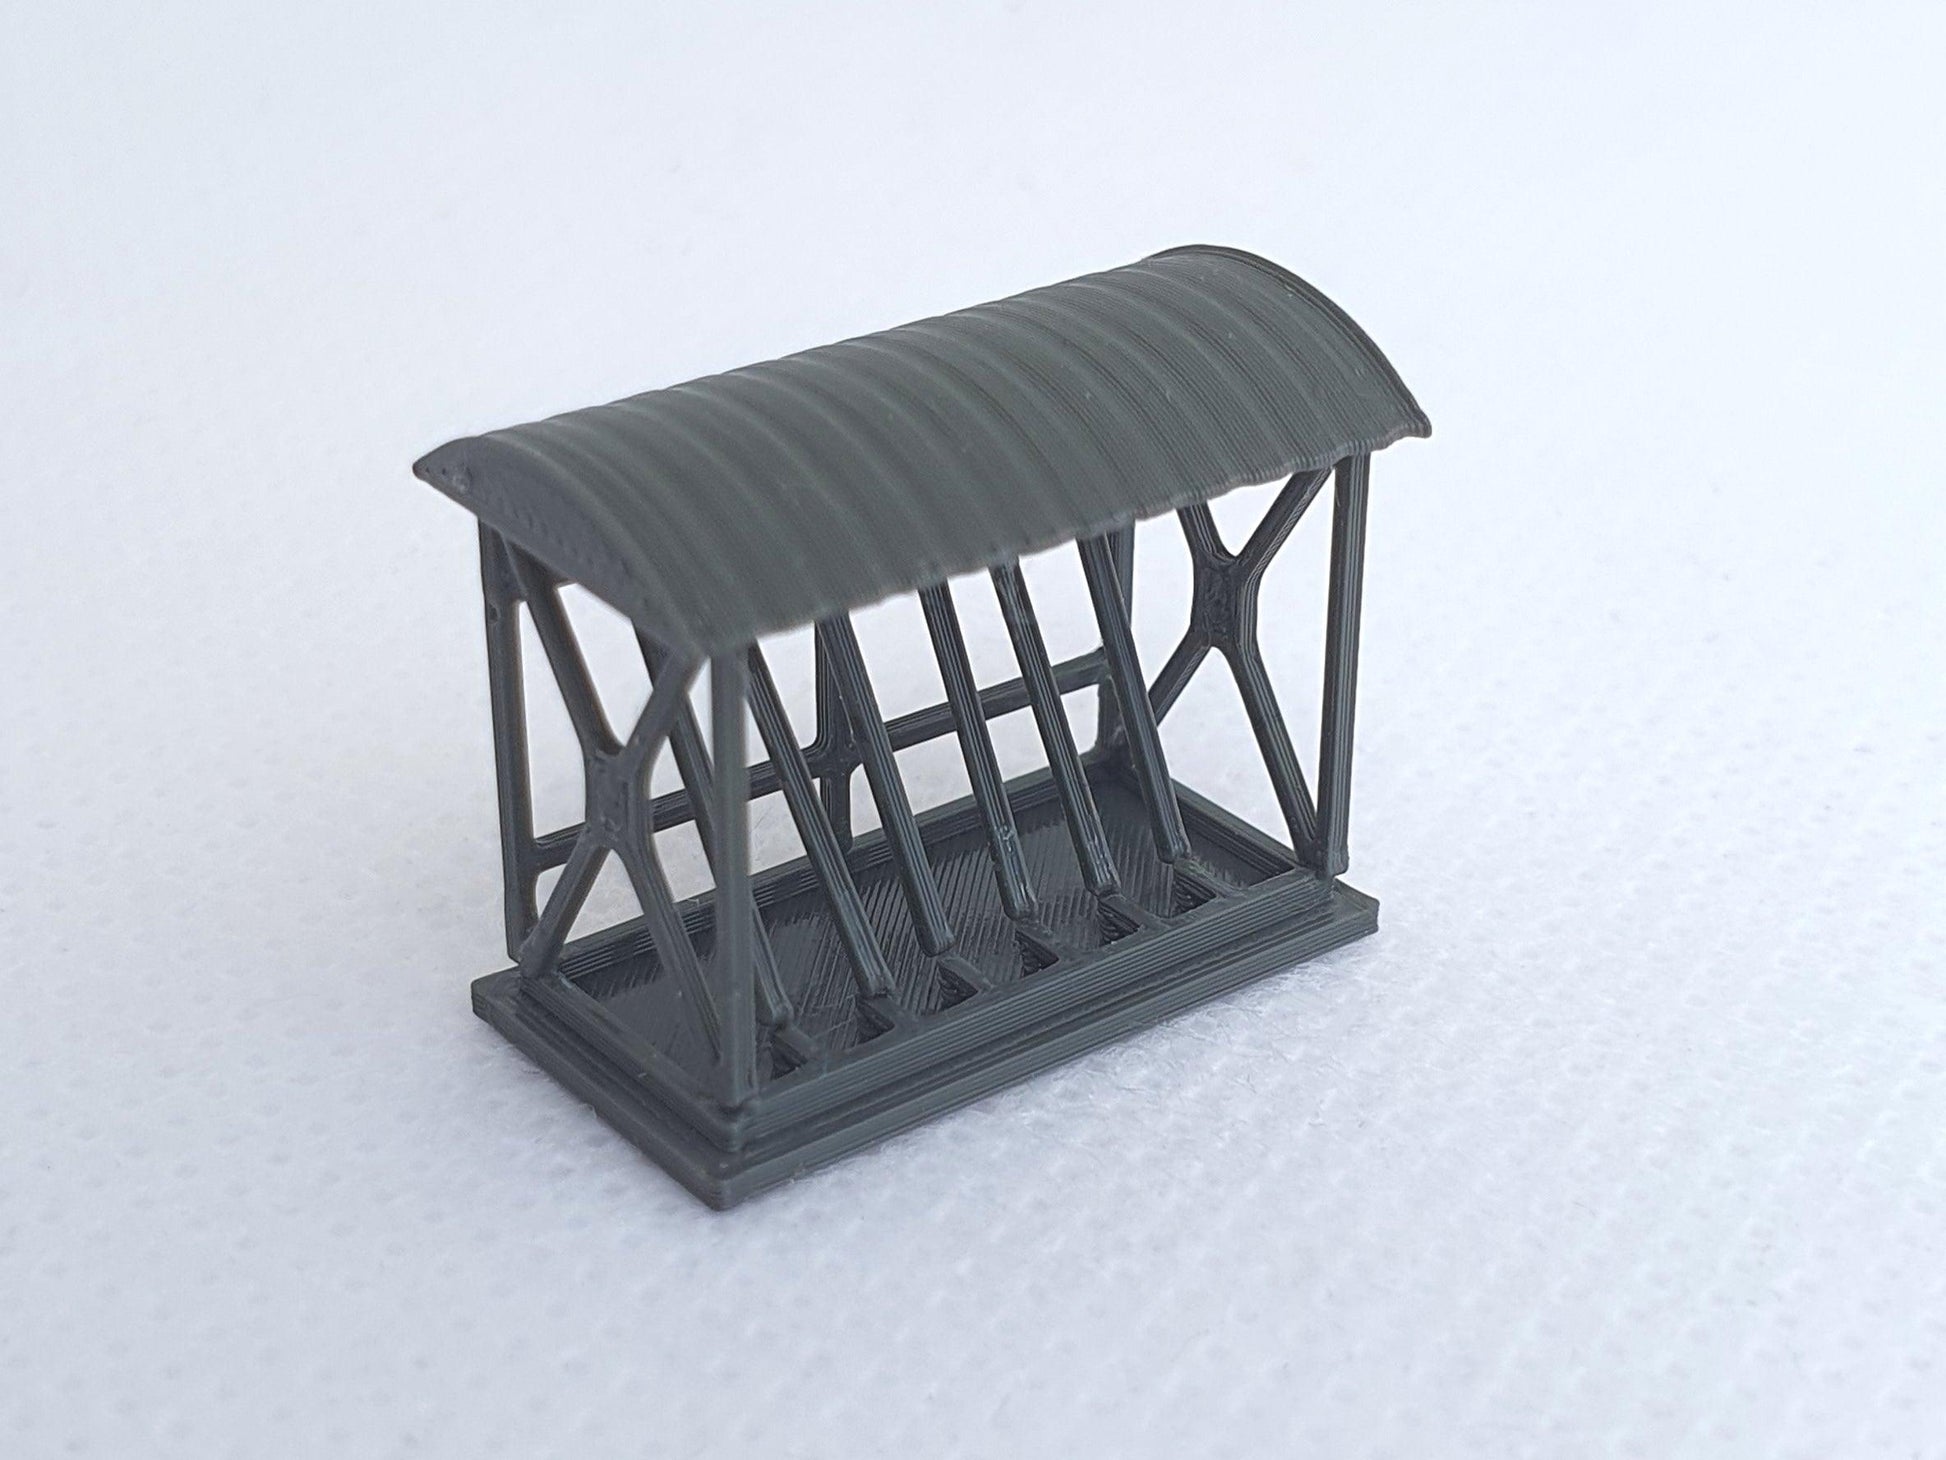 TT 120 gauge scale model of a bike shelter for up to 6 bicycles - Three Peaks Models